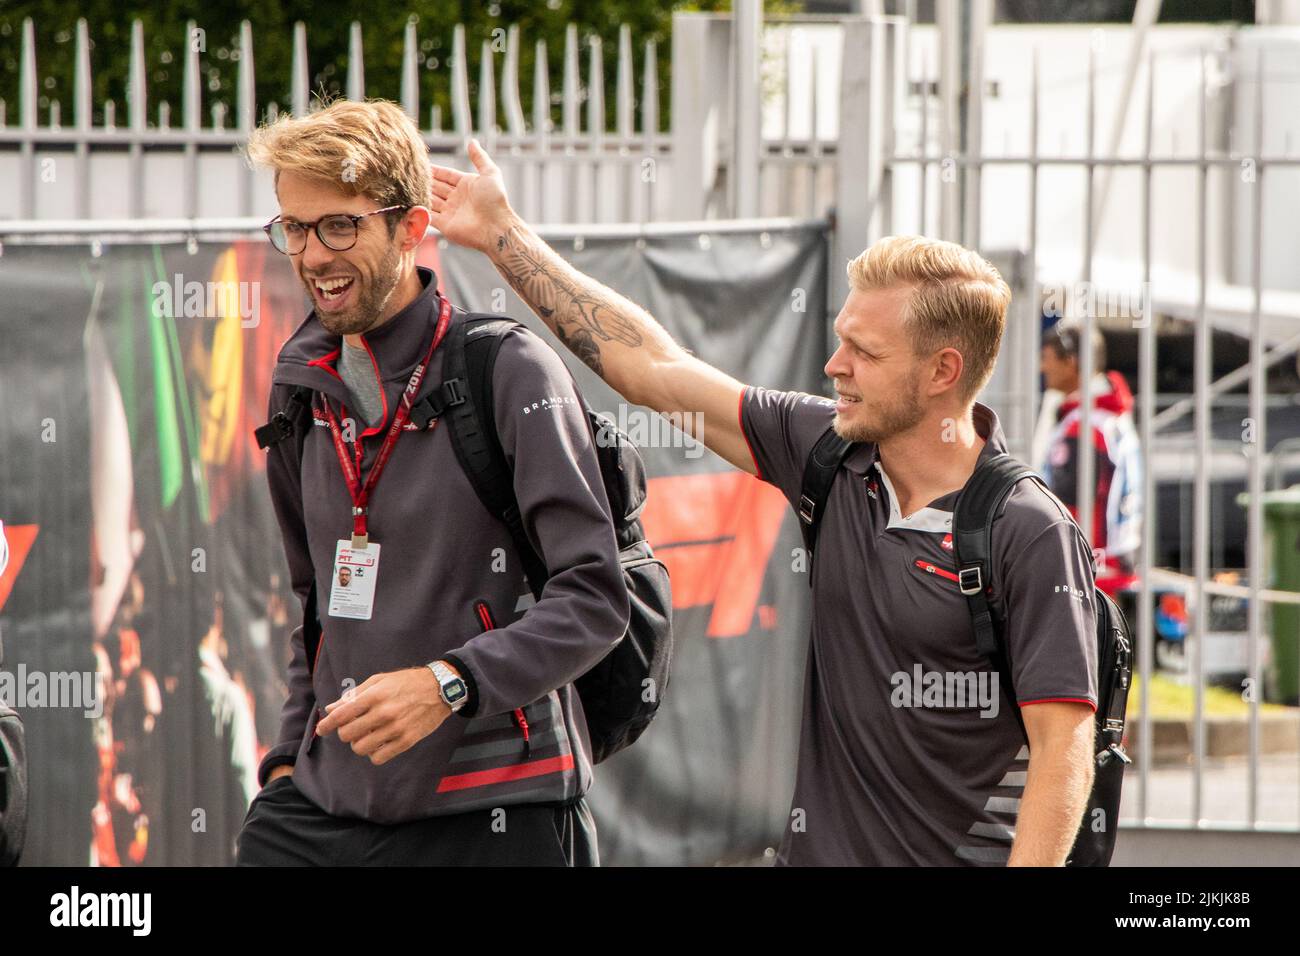 2018, Monza, Italy: Two friends during Formula 1, Italian Grand Prix in The Monza Circuit Stock Photo